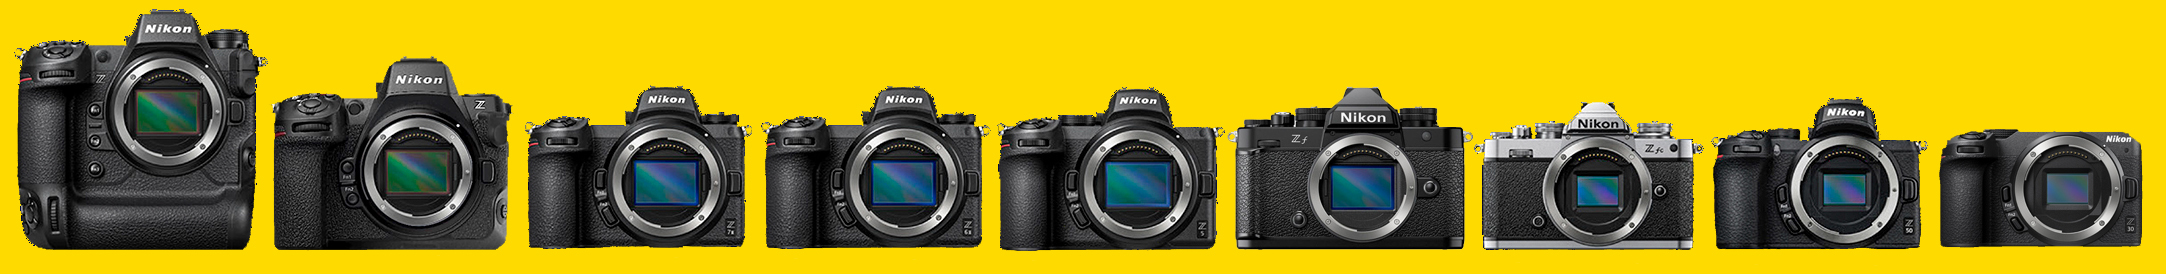 Nikon Z8 rumors from China confirm what we think we know about the Z8 -  Nikon Rumors